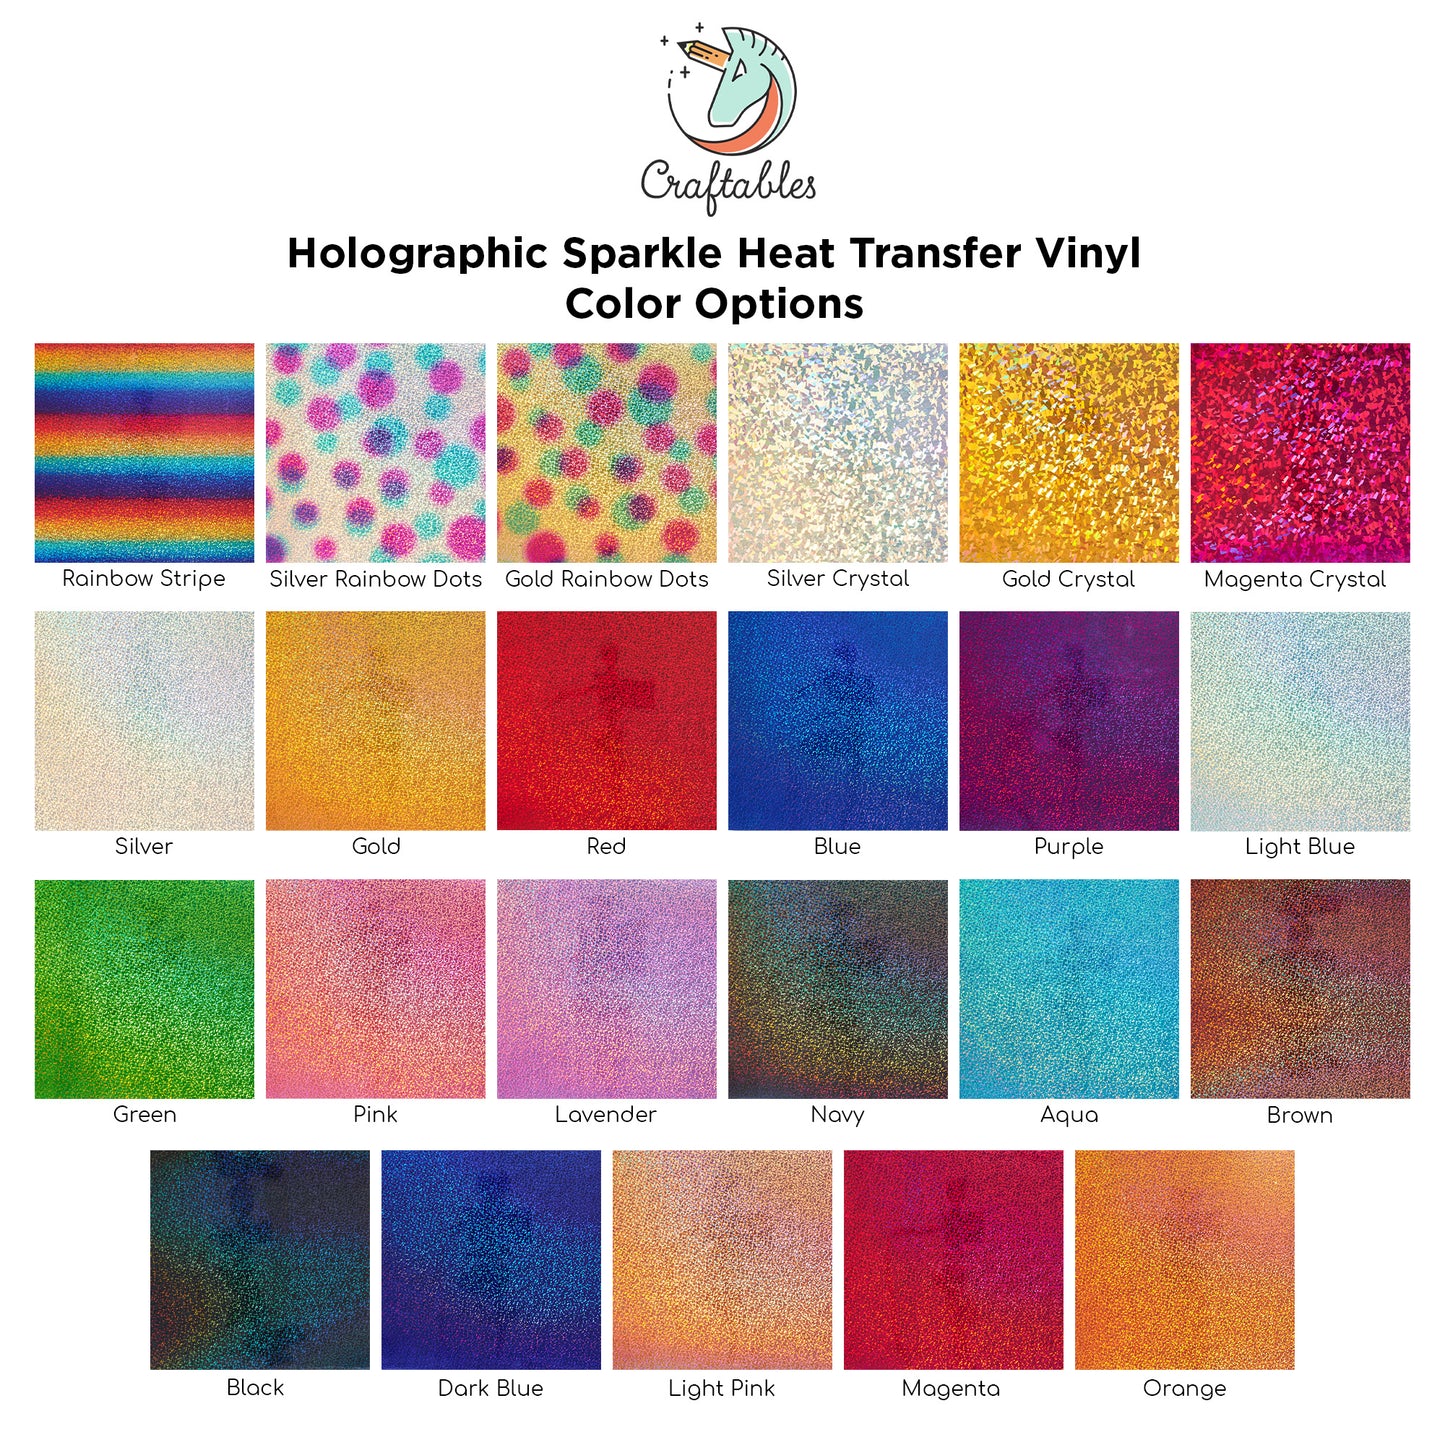 Gold Holographic Sparkle Heat Transfer Vinyl Sheets By Craftables